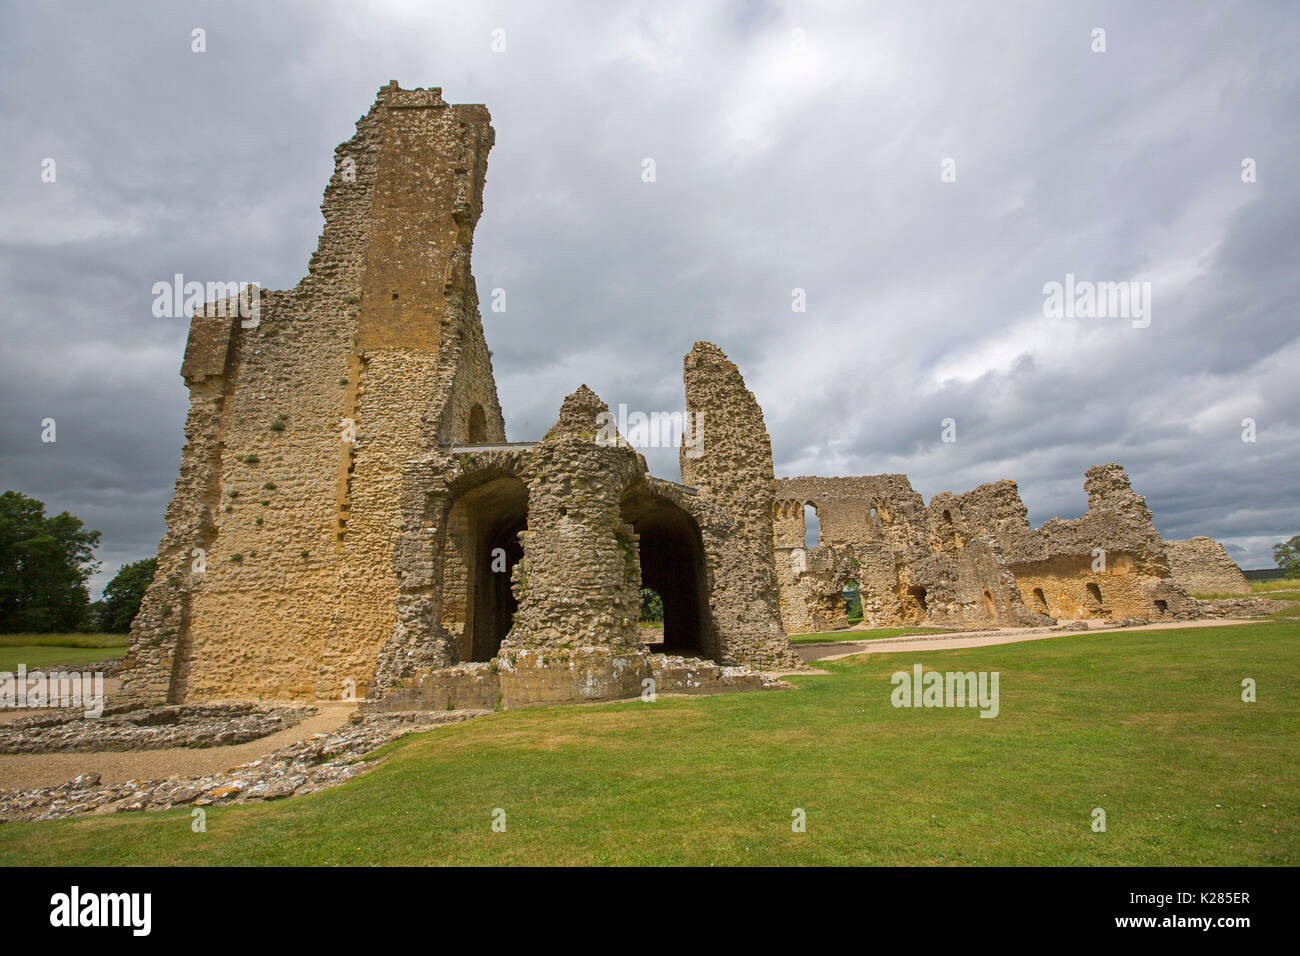 Ruins, including the great tower, of 12th century old Sherborne castle, Castleton, Dorset, England Stock Photo